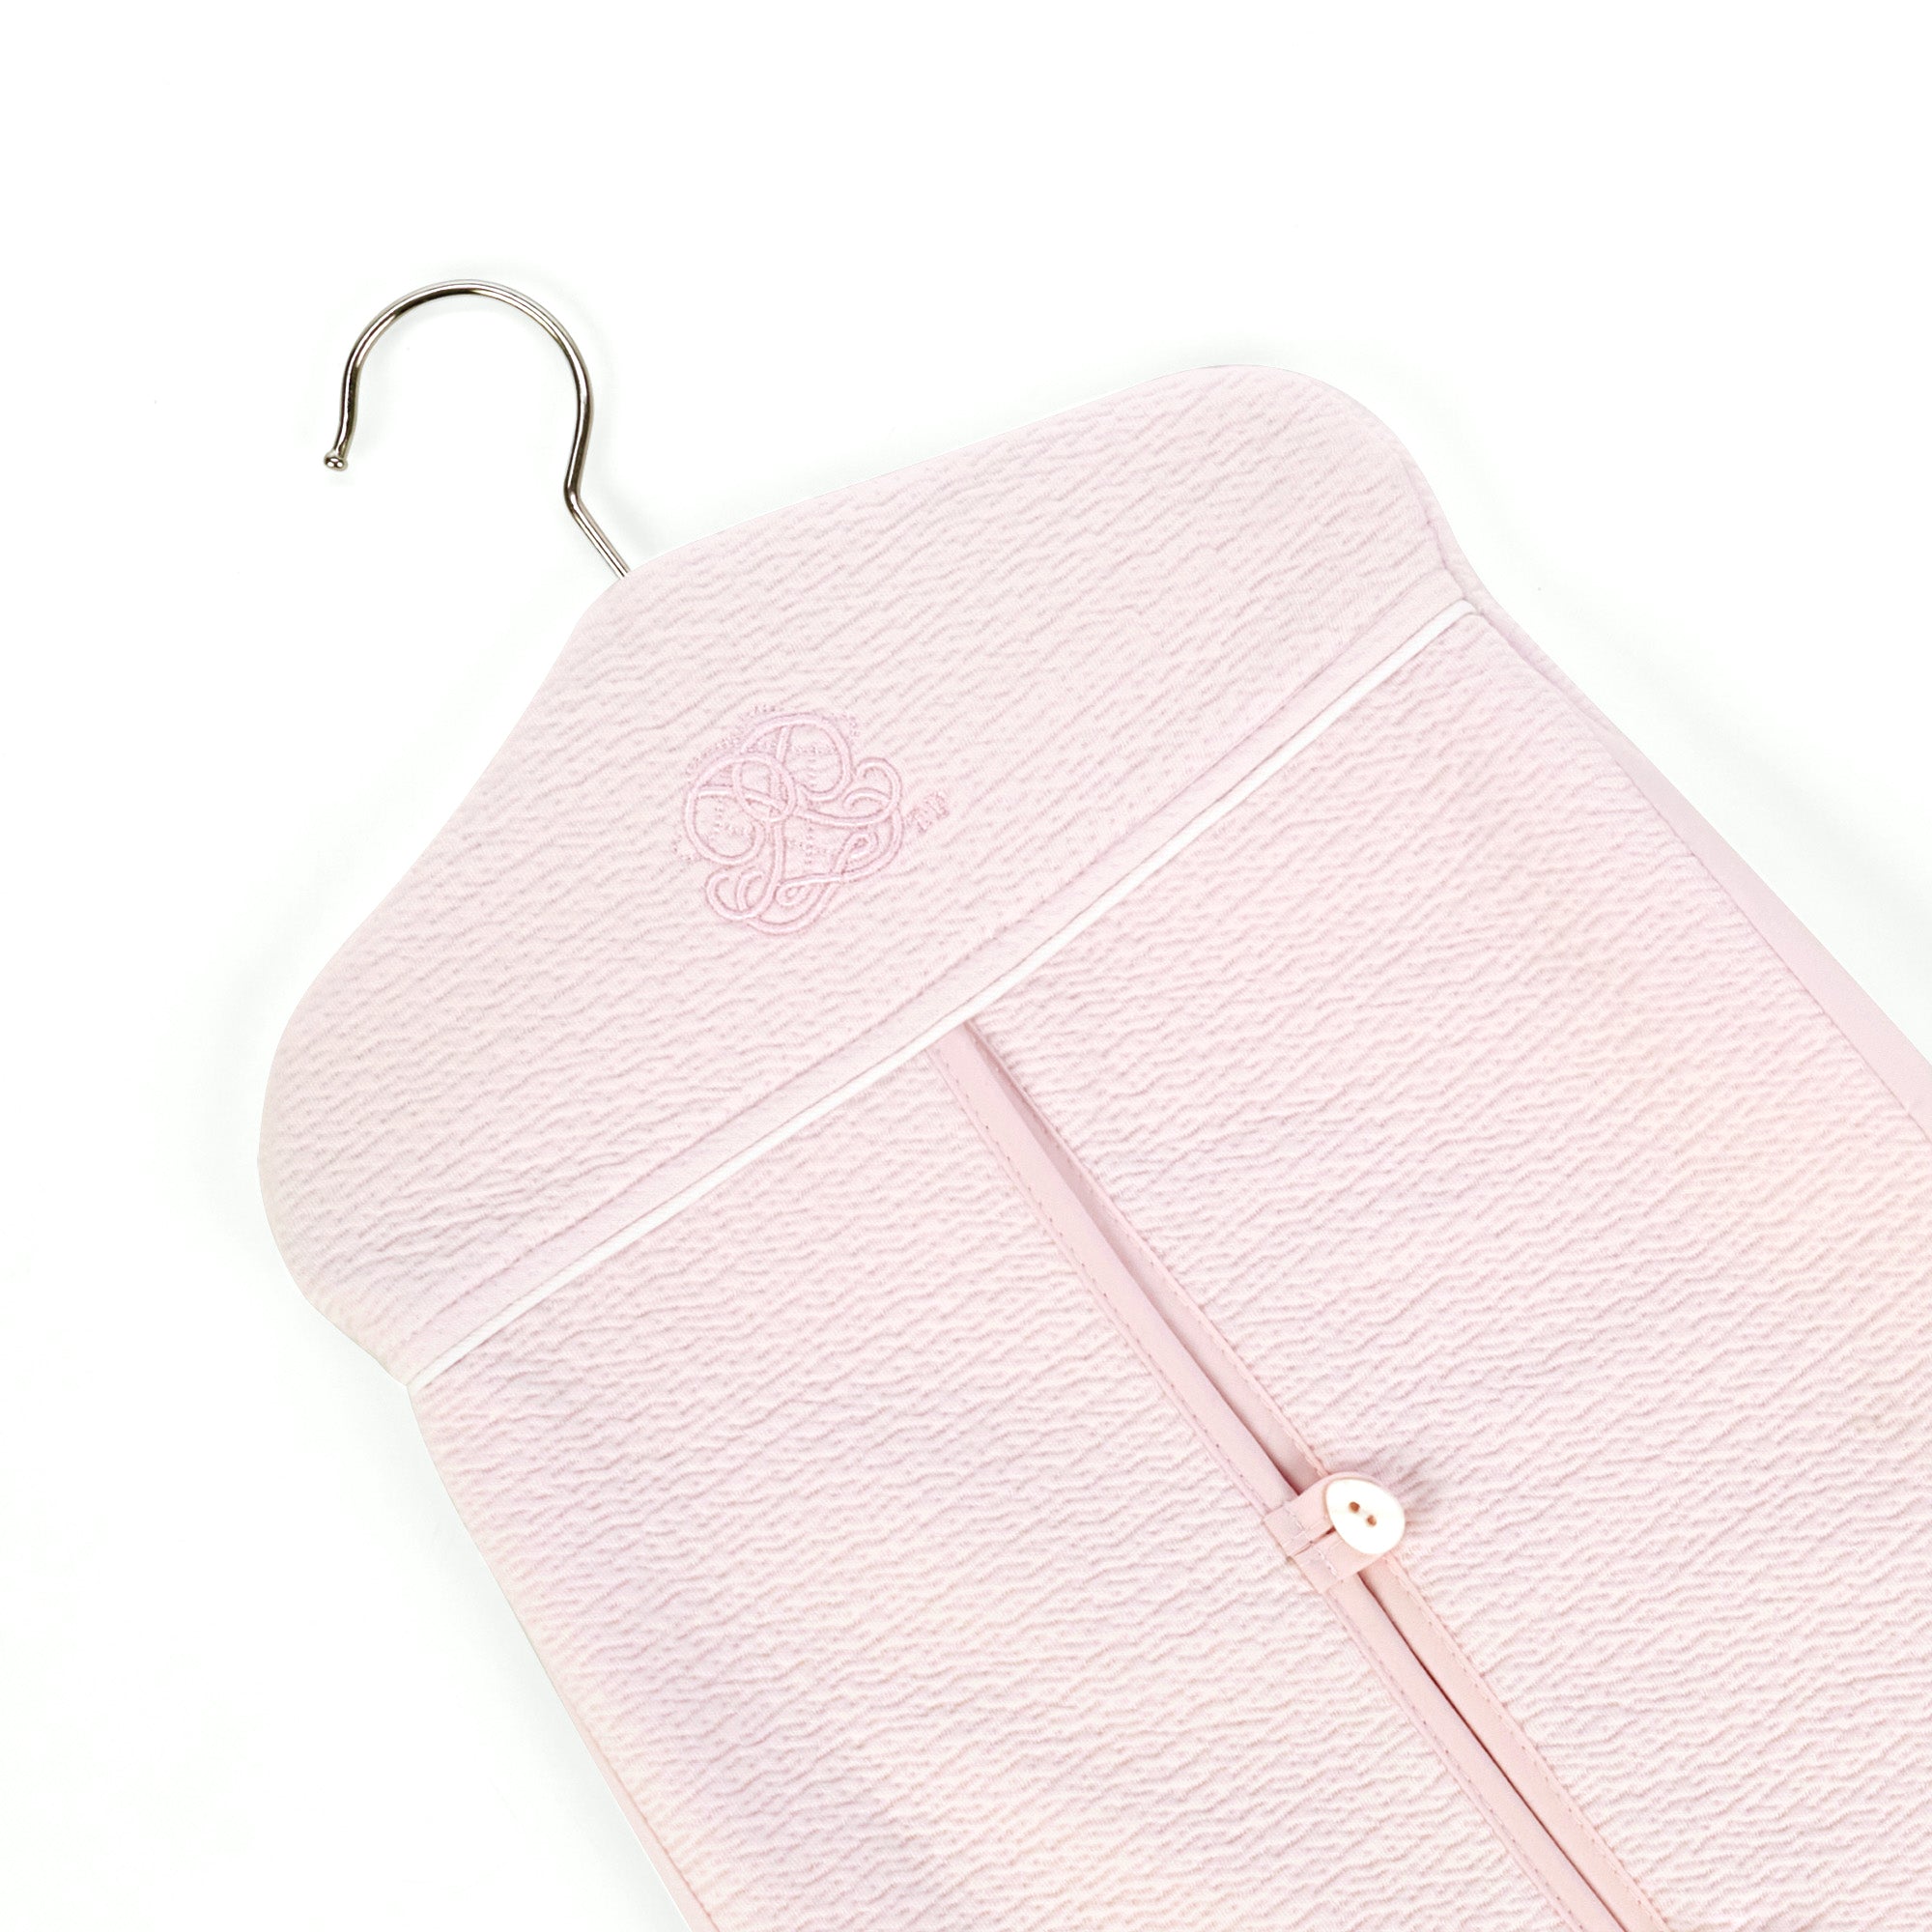 Theophile & Patachou Nappy Stacker - Cotton Pink